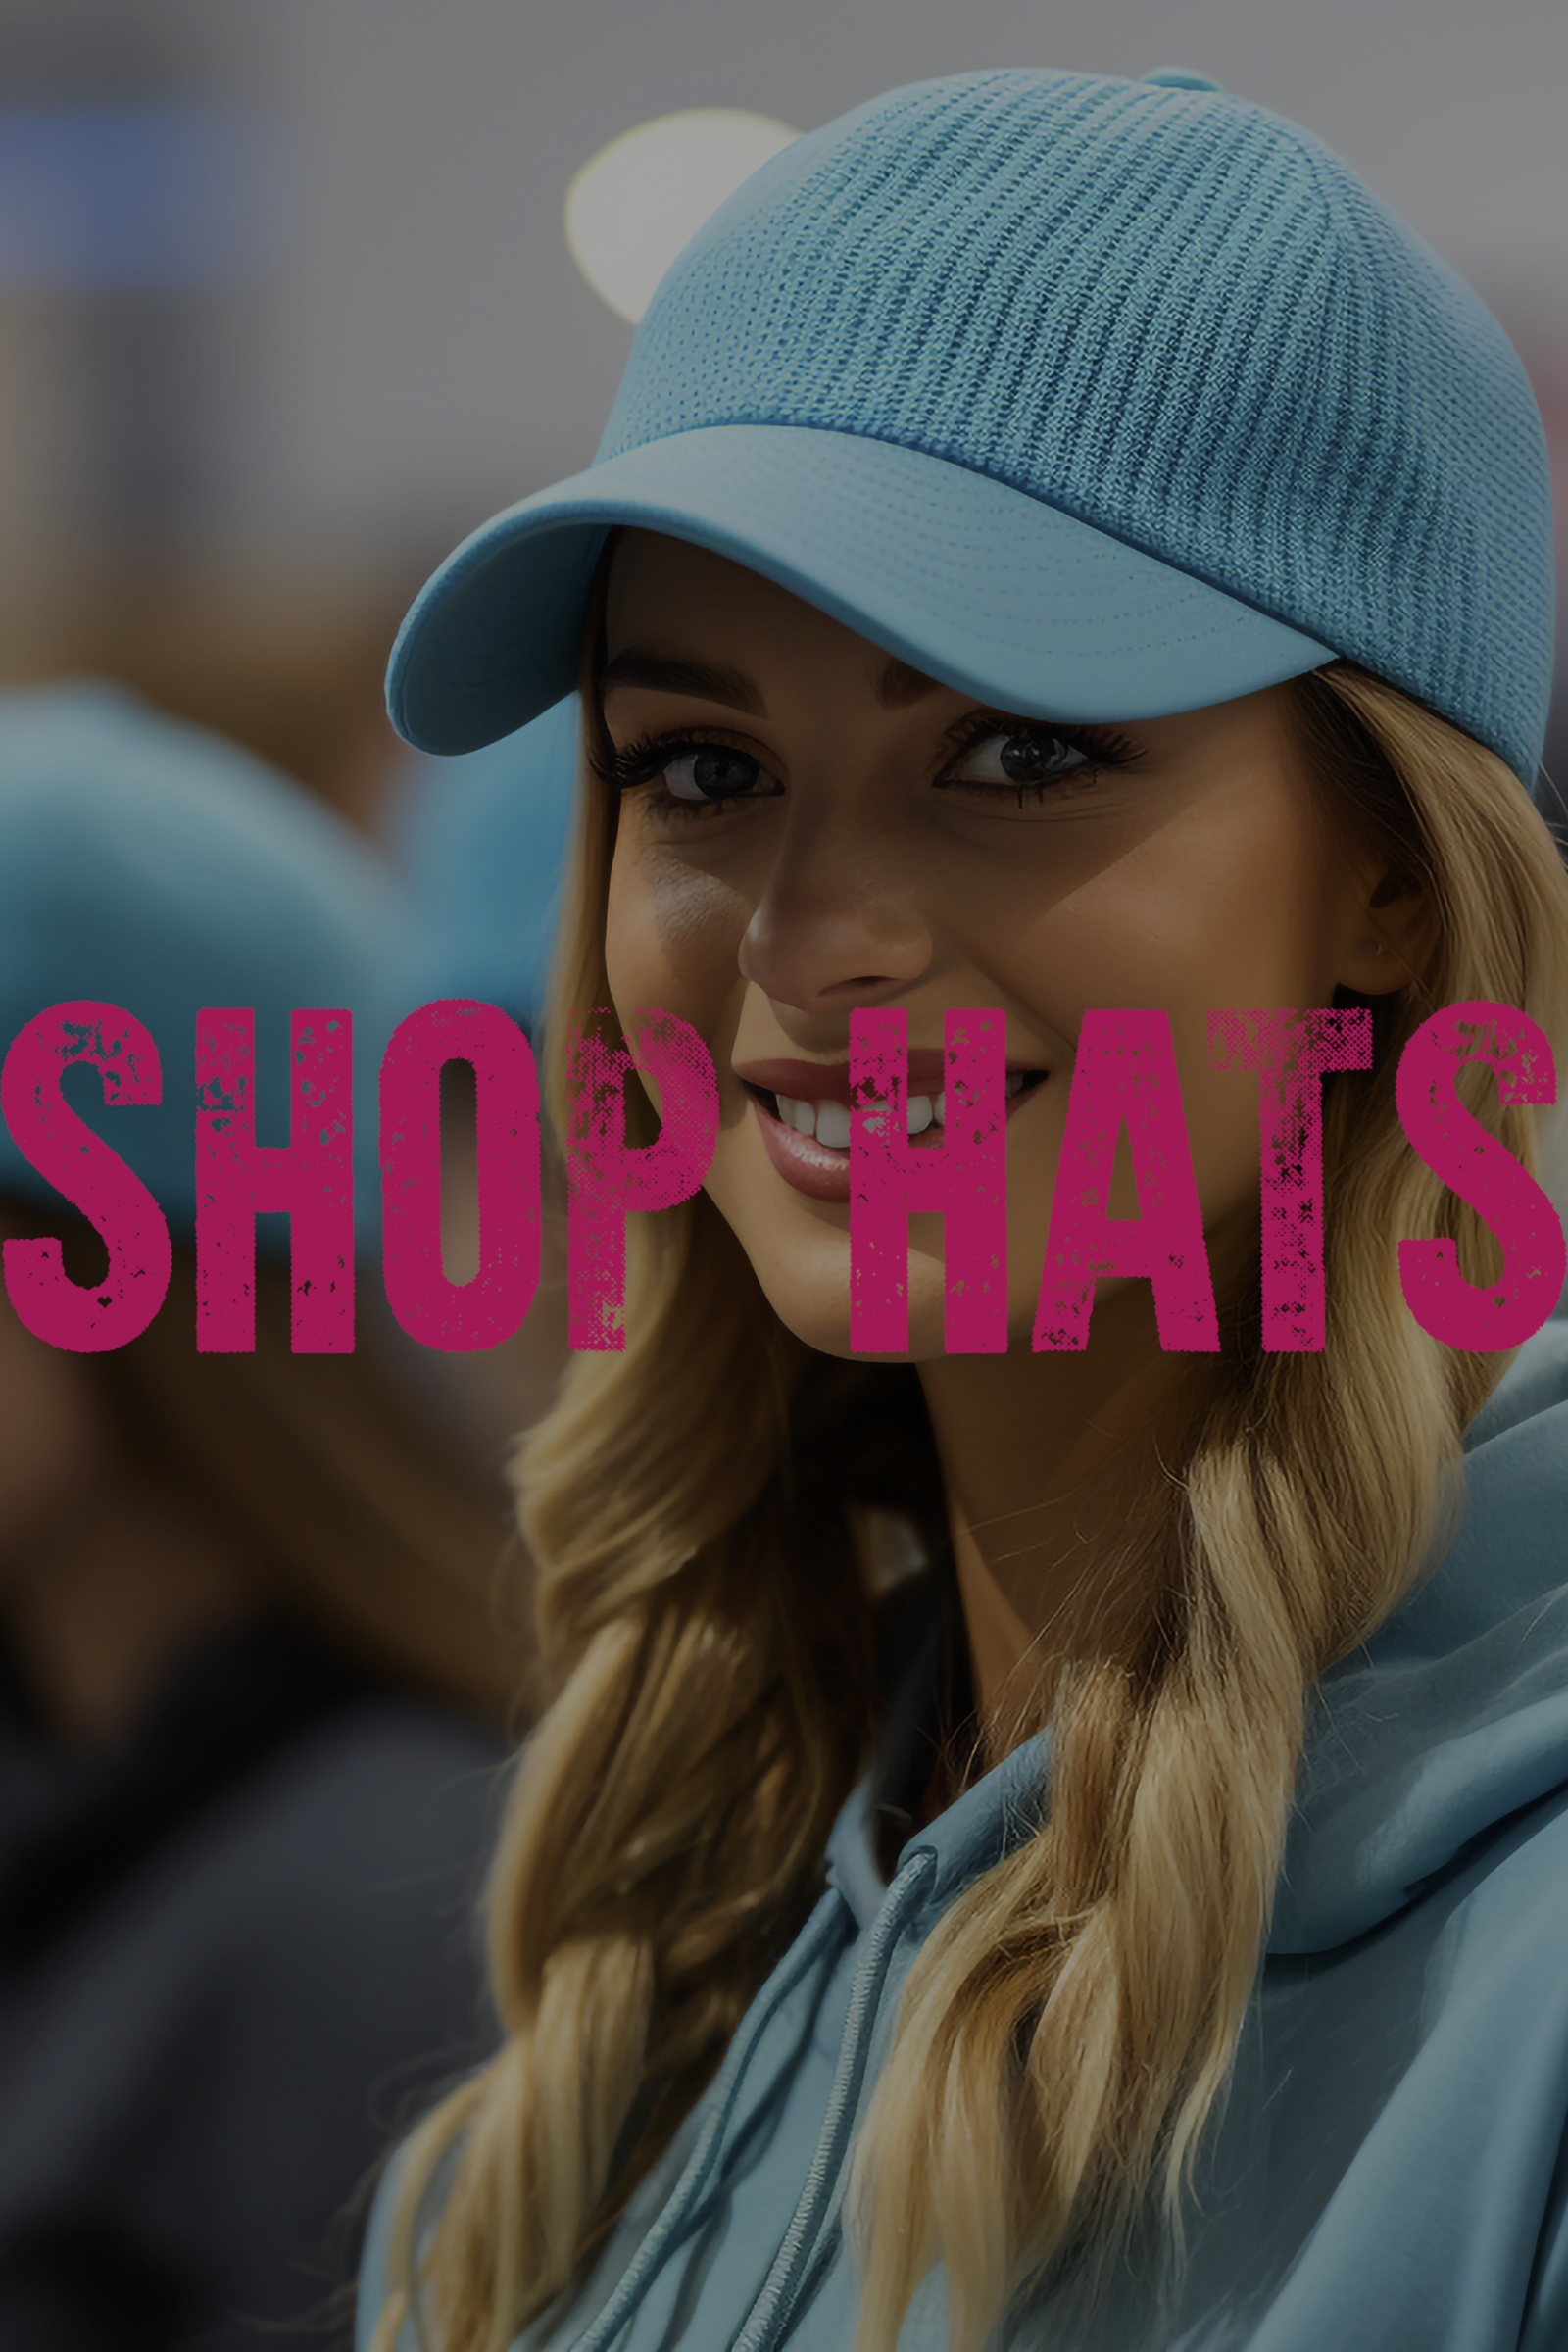 Shop Hats - Dash Outfitters